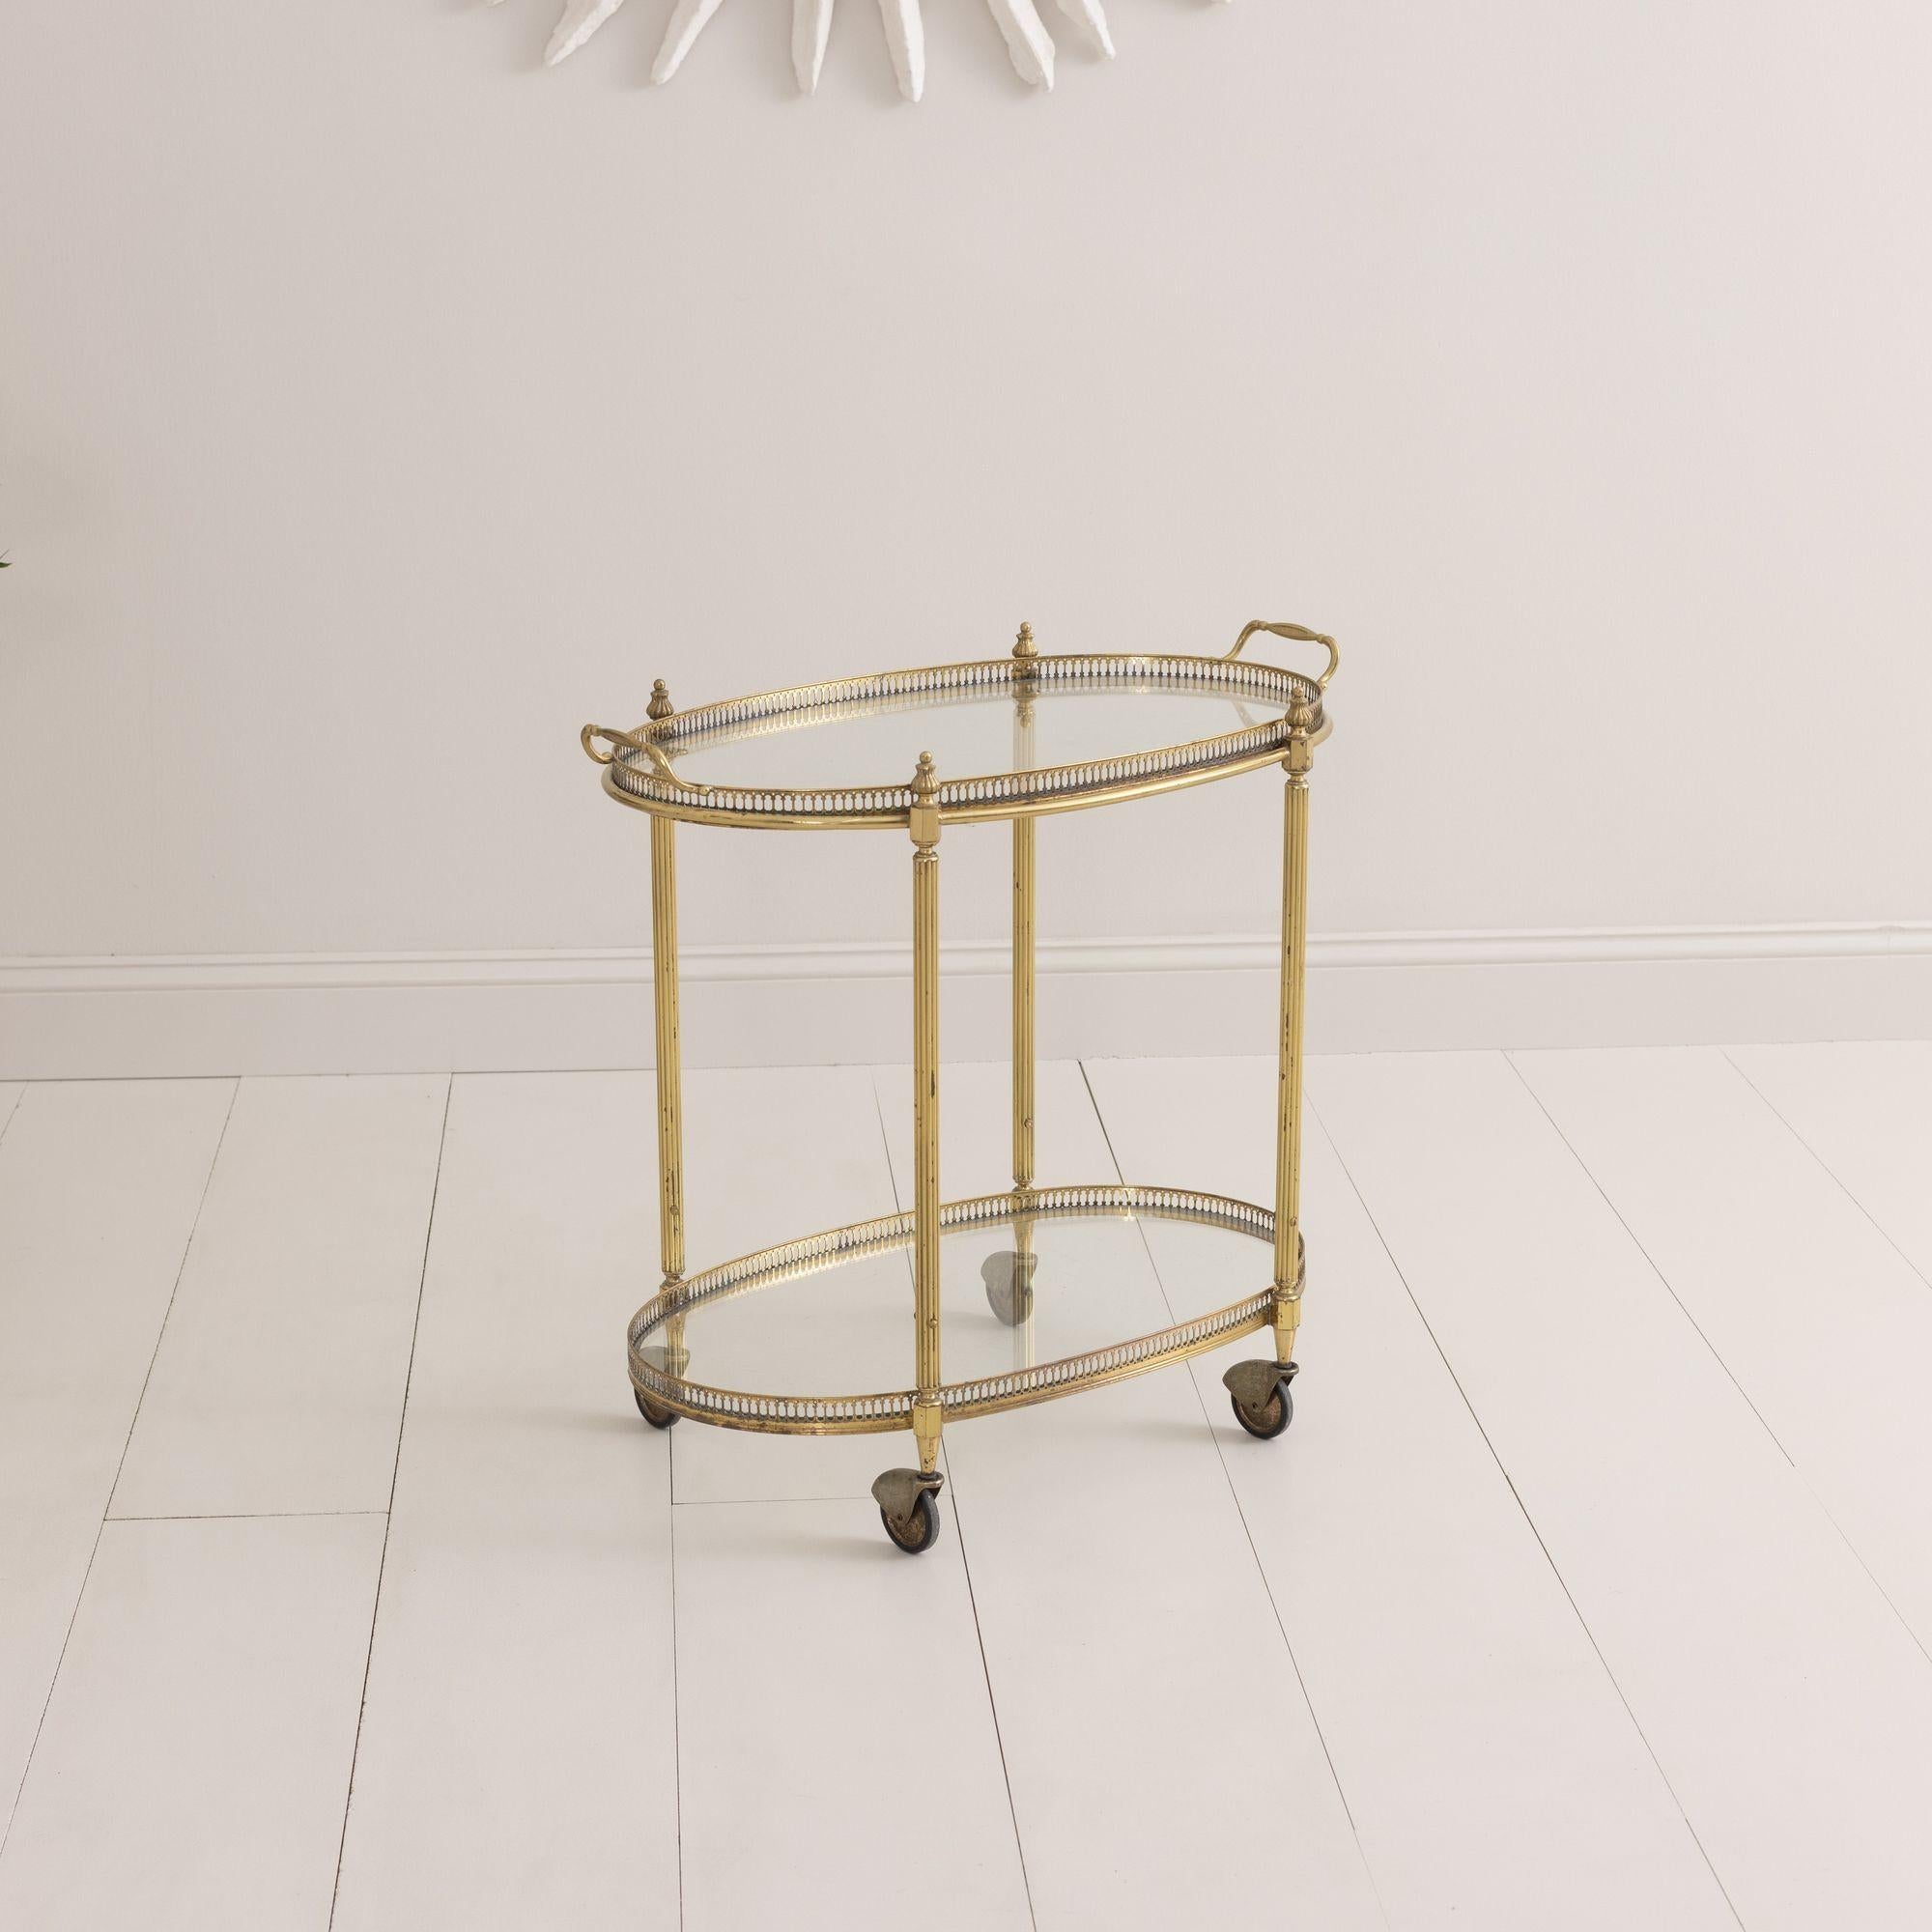 Vintage French brass serving trolly or bar cart with original castor wheels found in Paris, circa 1960.  Two-tiered glass with nicely patinated, pierced gallery to the top and bottom.  The top tray has handles and is removable.  Lovely round and